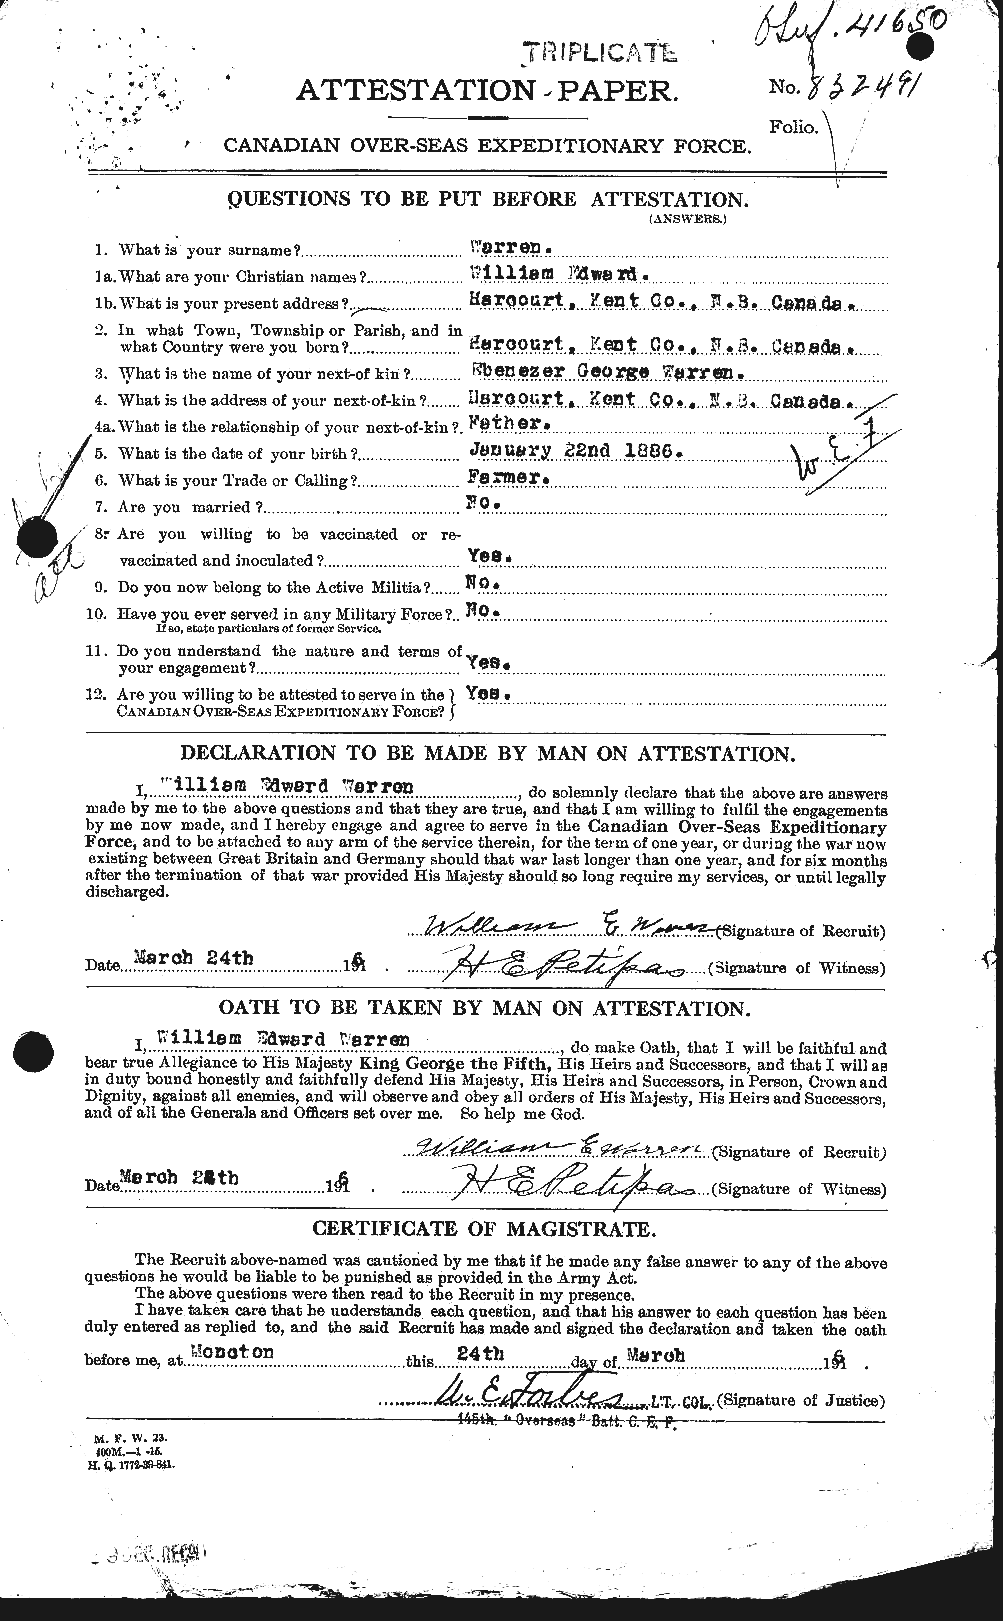 Personnel Records of the First World War - CEF 658684a